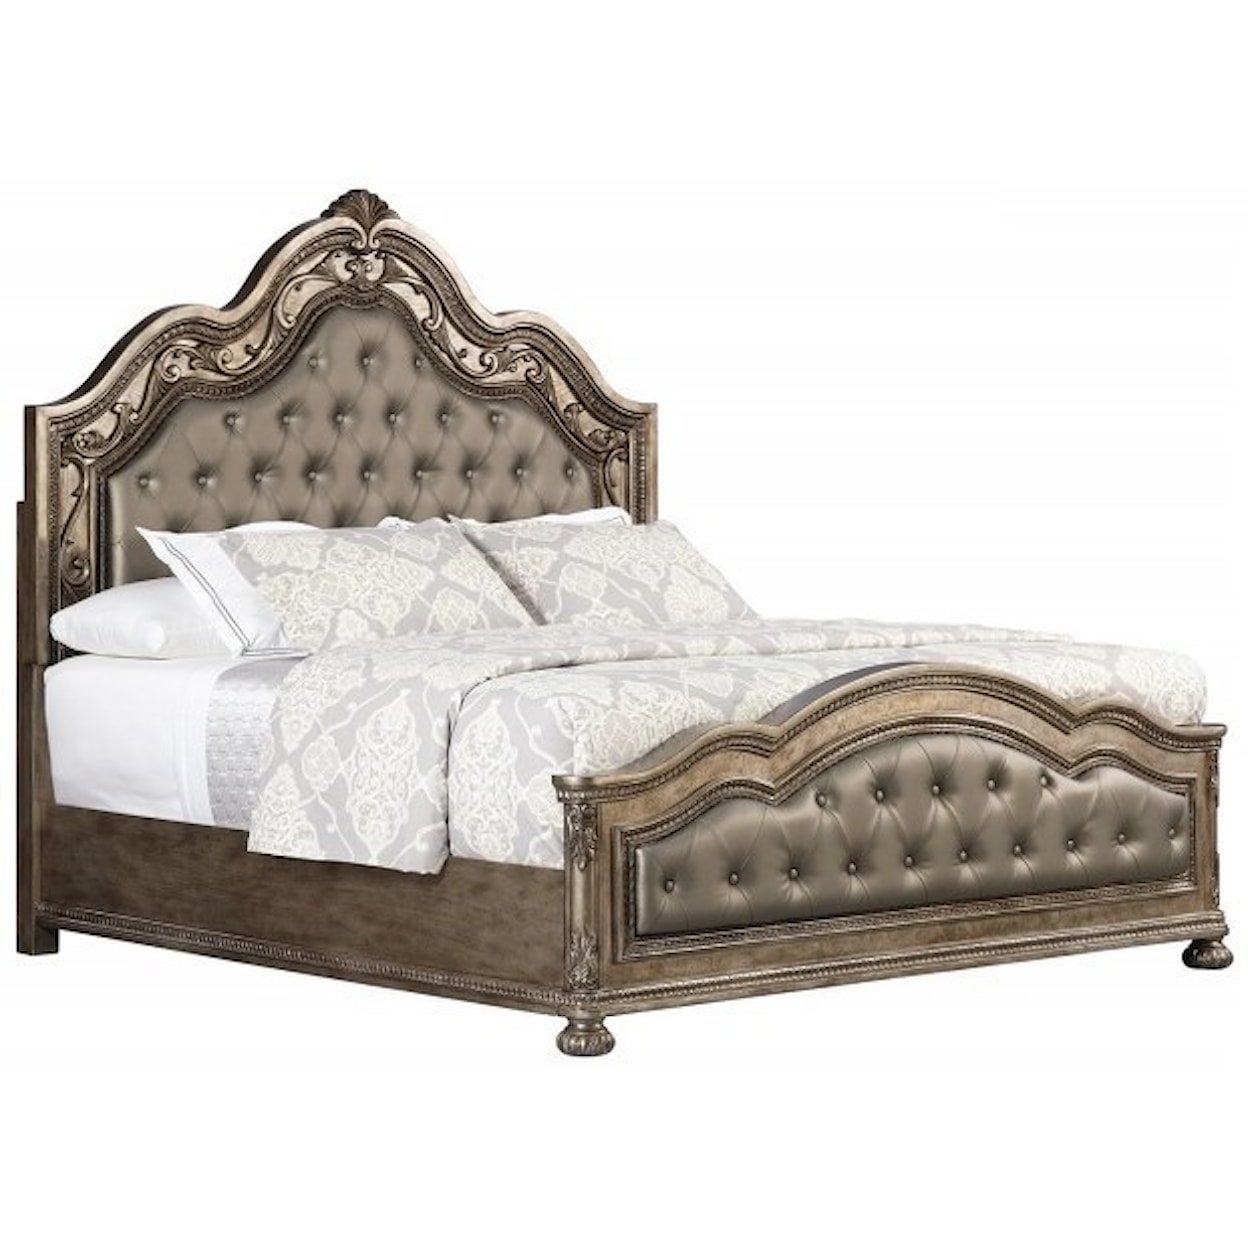 Avalon Furniture Seville Glamorous Queen Bed